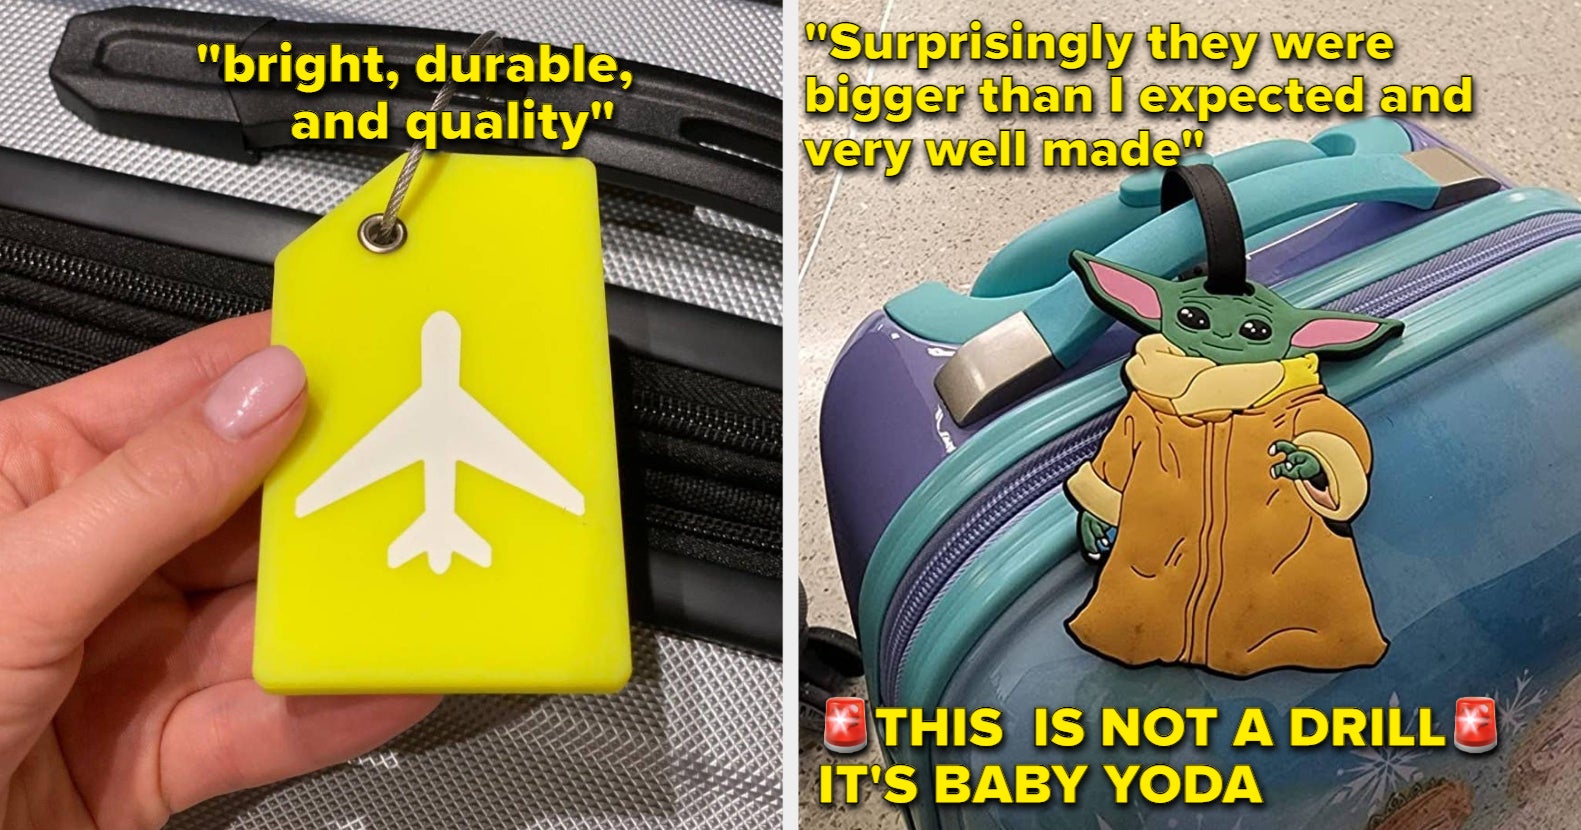 The 26 best luggage tags of 2023, perfect for frequent flyers